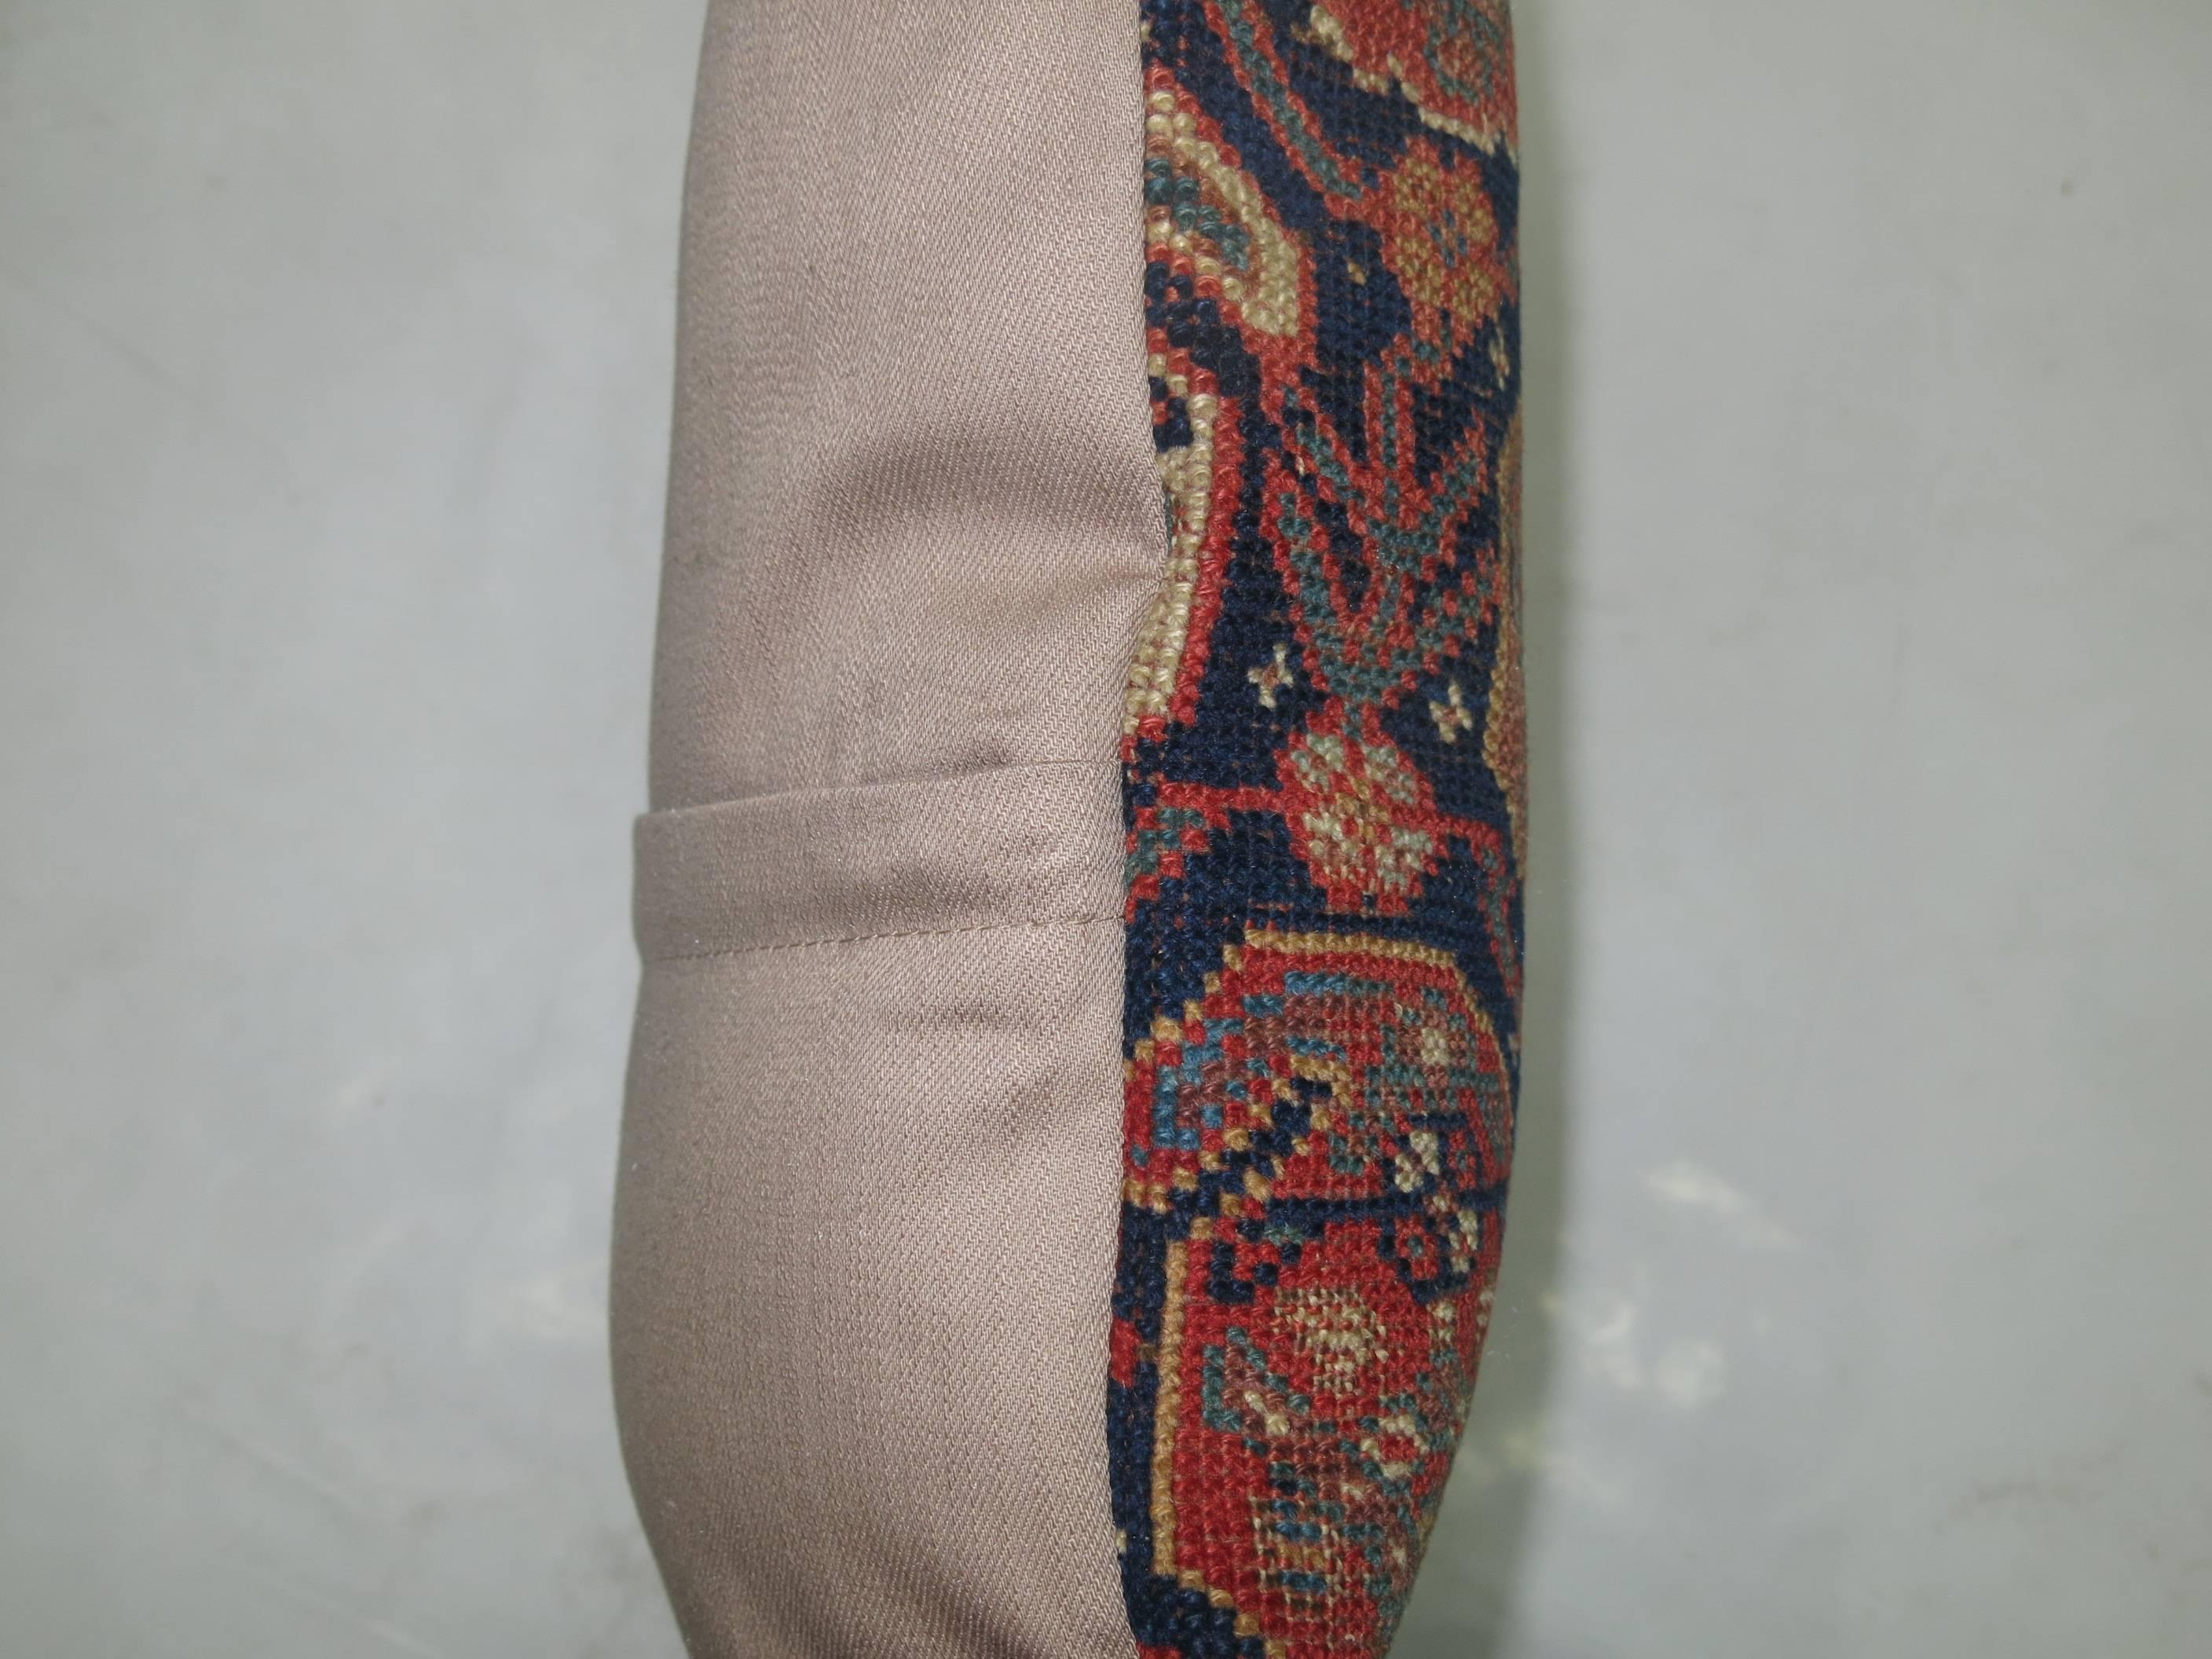 Pillow made from a 19th century antique Persian Afshar rug with cotton back. Zipper closure.

Measures: 19” x 20”.